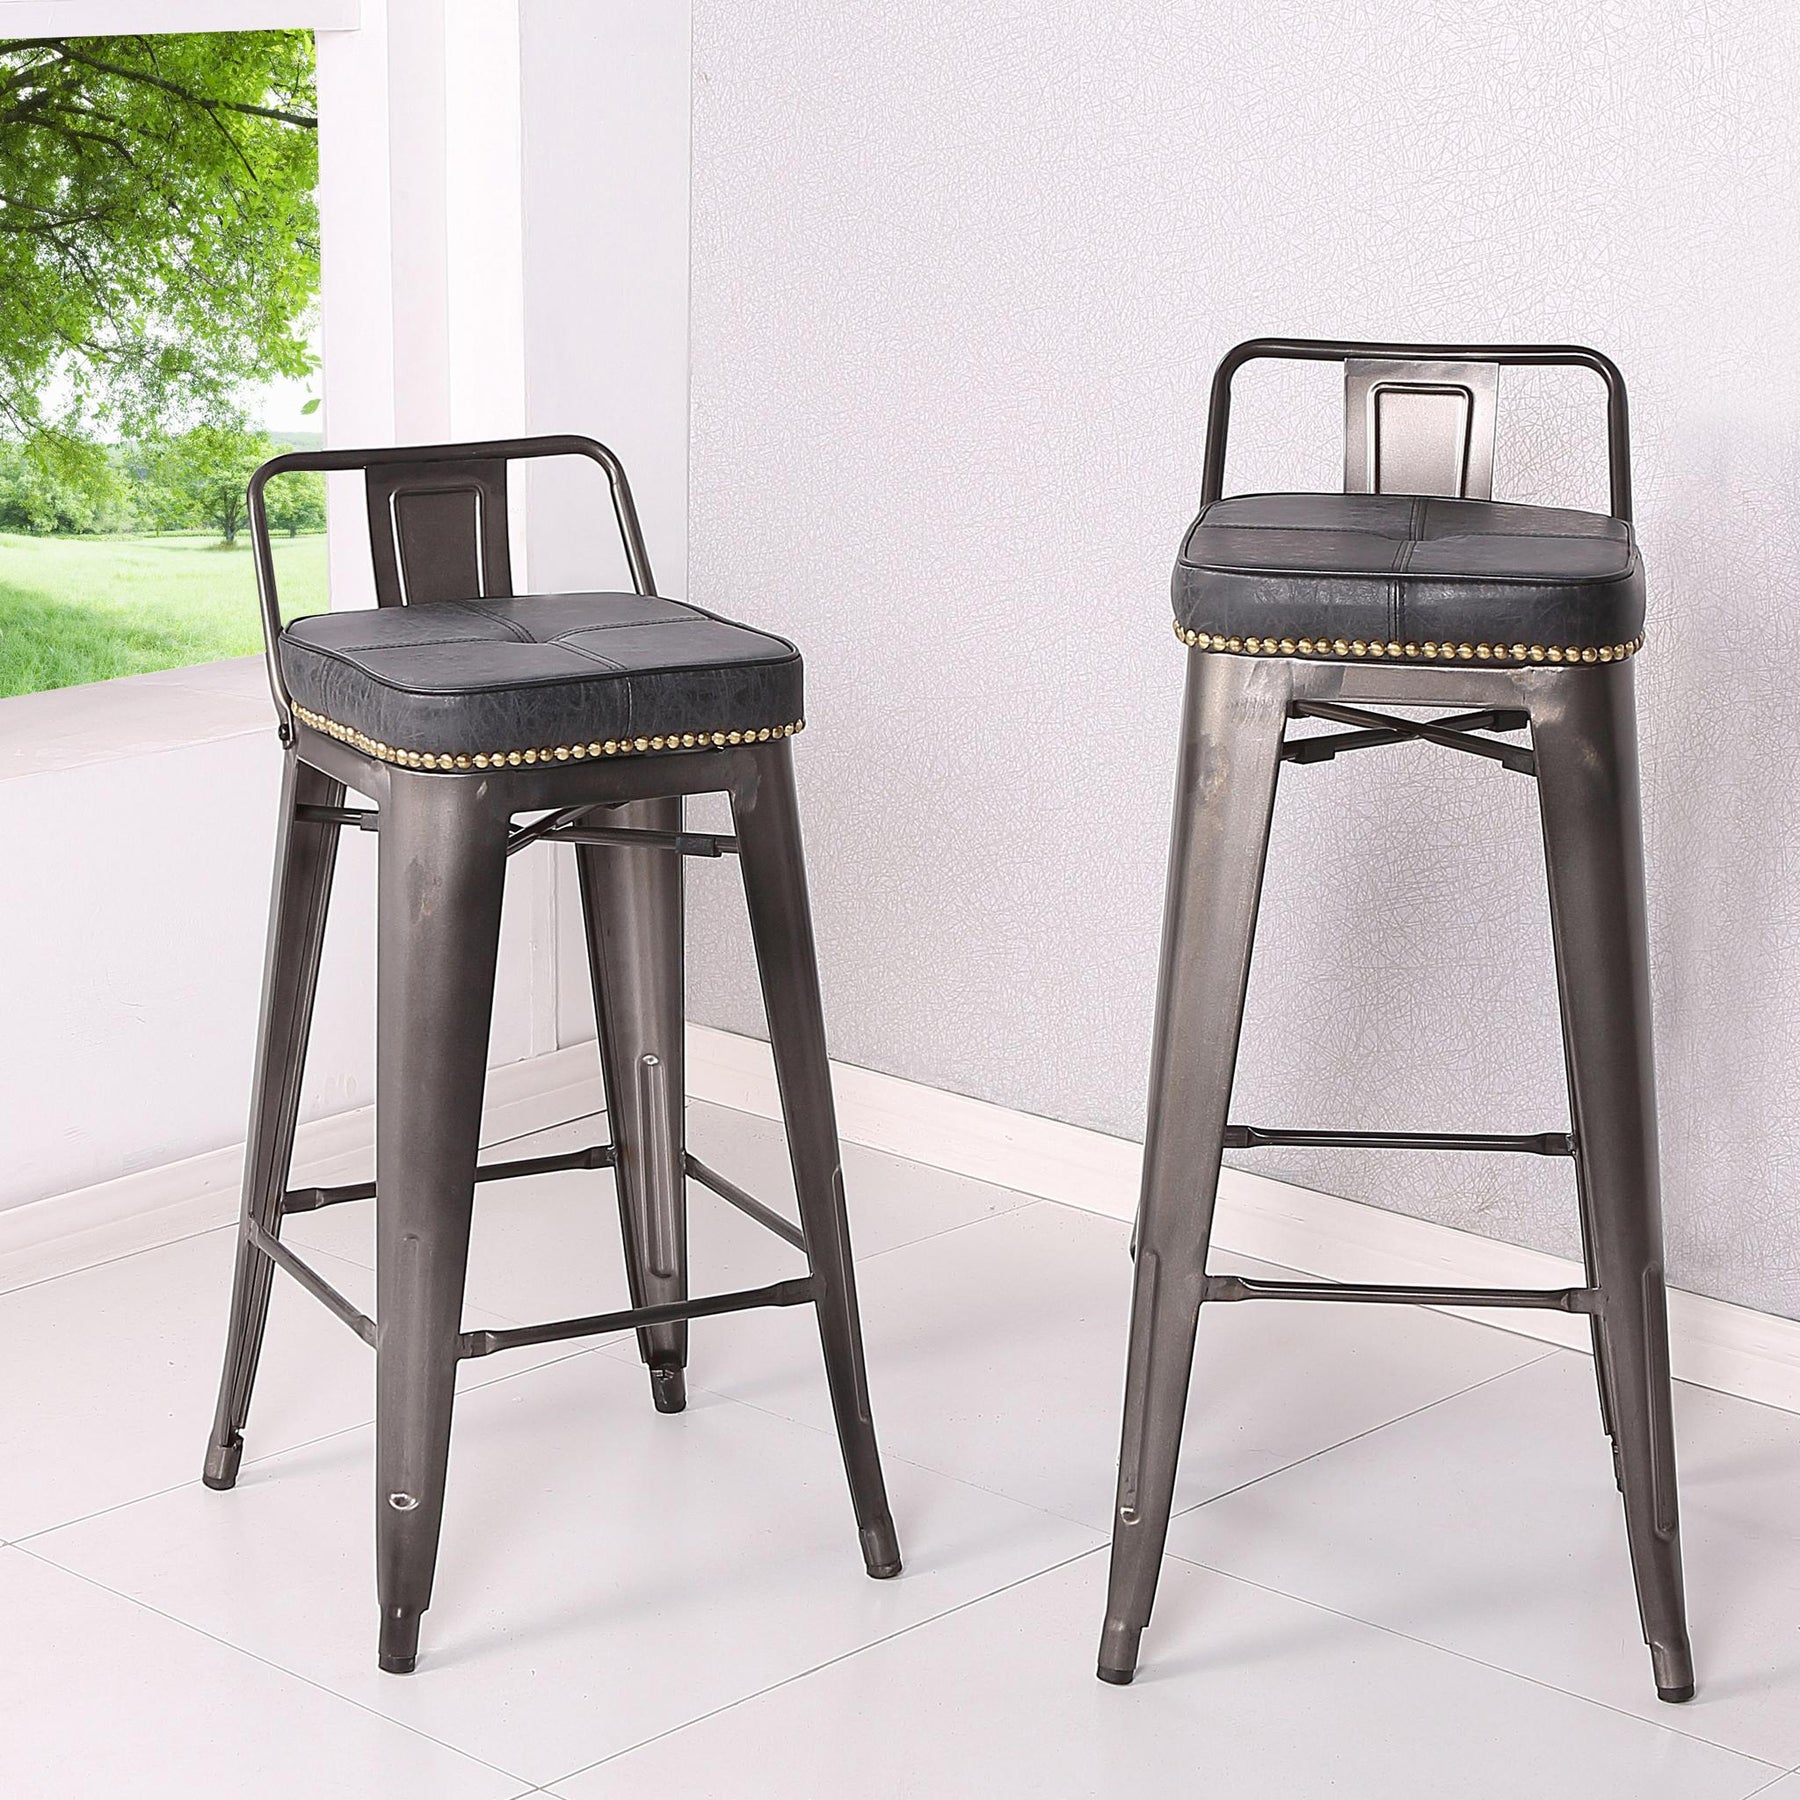 Metropolis PU Leather Low Back Counter Stool (Set of 4) by New Pacific Direct - 9300032